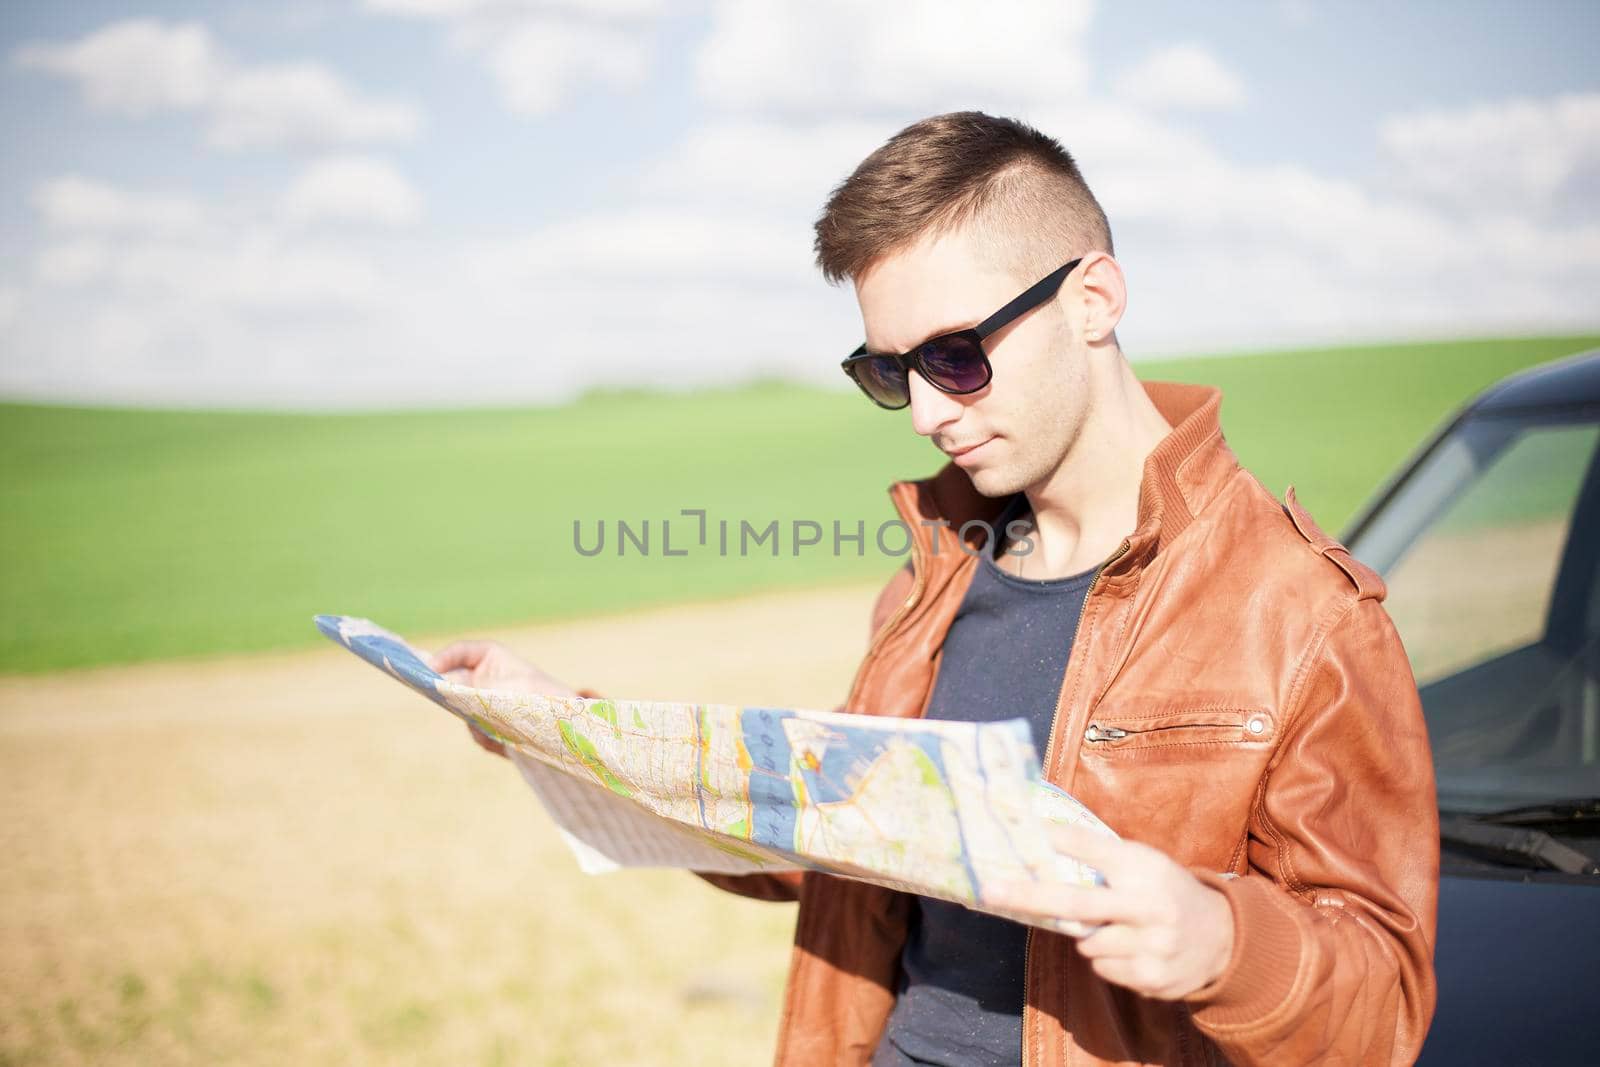 A tourist man next to the car looks at the map of the area. Traveler by Jyliana